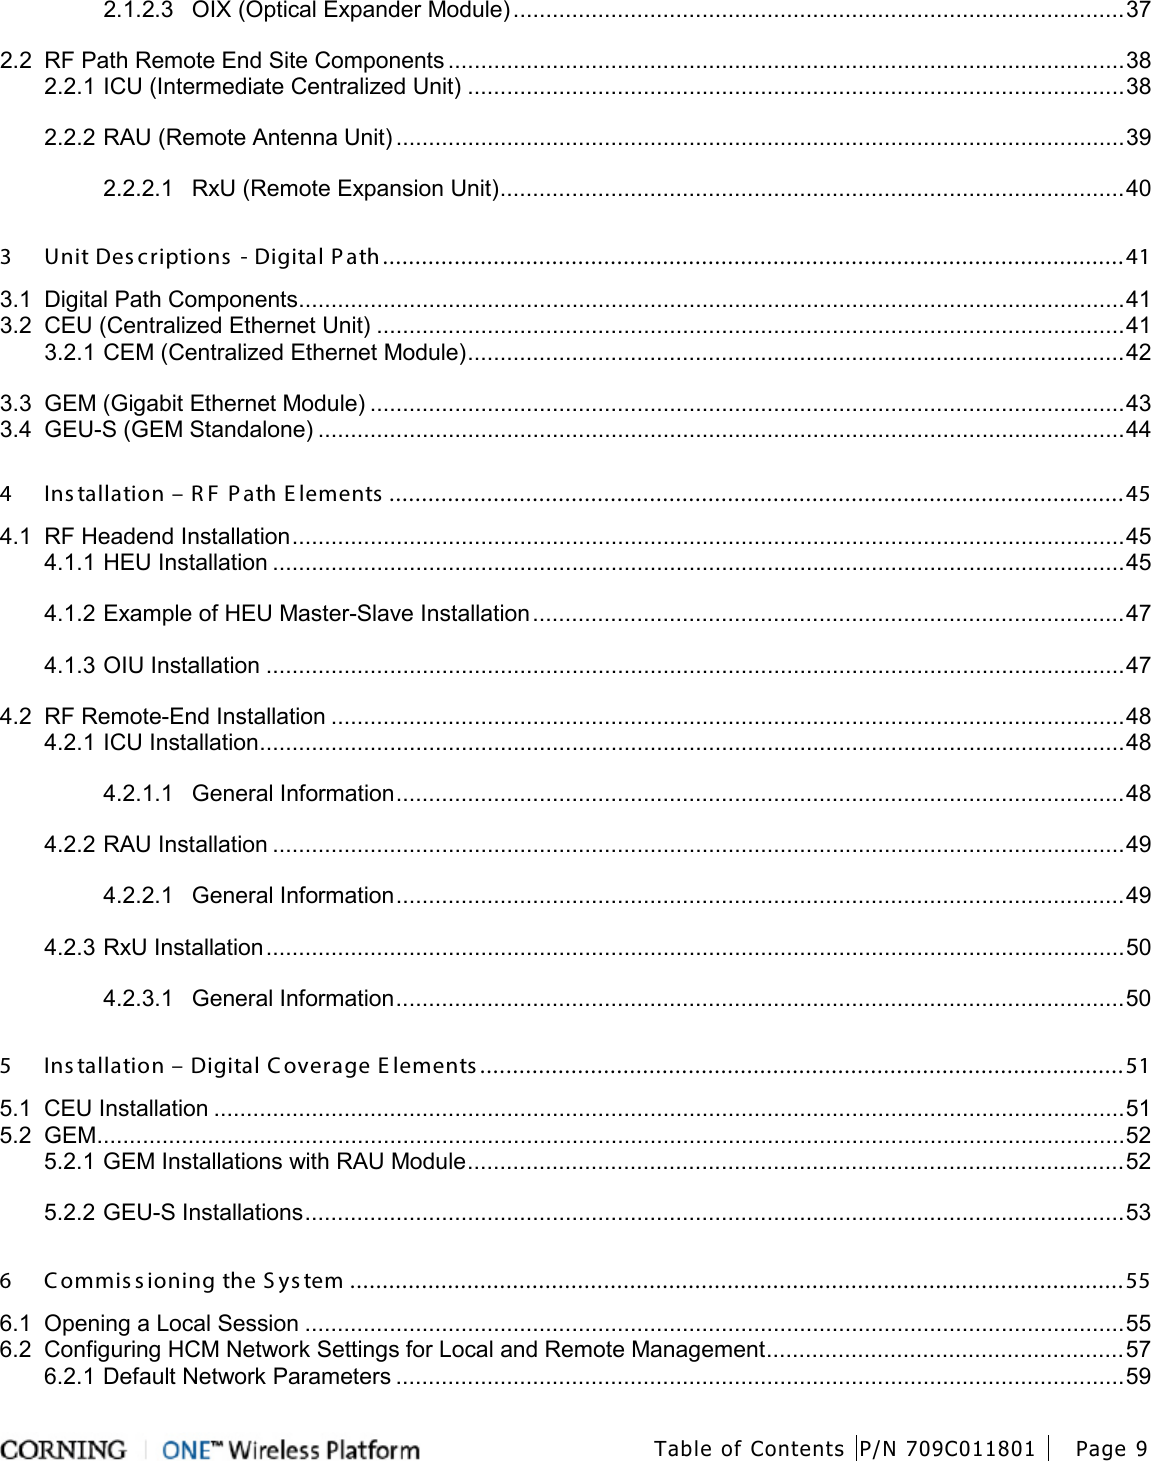  Table of Contents P/N 709C011801 Page 9   2.1.2.3 OIX (Optical Expander Module) .............................................................................................. 37 2.2 RF Path Remote End Site Components ........................................................................................................ 38 2.2.1 ICU (Intermediate Centralized Unit) ..................................................................................................... 38 2.2.2 RAU (Remote Antenna Unit) ................................................................................................................ 39 2.2.2.1 RxU (Remote Expansion Unit) ................................................................................................ 40 3 Unit Des criptions  - Digital P ath .................................................................................................................. 41 3.1 Digital Path Components ............................................................................................................................... 41 3.2 CEU (Centralized Ethernet Unit) ................................................................................................................... 41 3.2.1 CEM (Centralized Ethernet Module) ..................................................................................................... 42 3.3 GEM (Gigabit Ethernet Module) .................................................................................................................... 43 3.4 GEU-S (GEM Standalone) ............................................................................................................................ 44 4 Ins tallation – R F  P ath E lements  ................................................................................................................. 45 4.1 RF Headend Installation ................................................................................................................................ 45 4.1.1 HEU Installation ................................................................................................................................... 45 4.1.2 Example of HEU Master-Slave Installation ........................................................................................... 47 4.1.3 OIU Installation .................................................................................................................................... 47 4.2 RF Remote-End Installation .......................................................................................................................... 48 4.2.1 ICU Installation ..................................................................................................................................... 48 4.2.1.1 General Information ................................................................................................................ 48 4.2.2 RAU Installation ................................................................................................................................... 49 4.2.2.1 General Information ................................................................................................................ 49 4.2.3 RxU Installation .................................................................................................................................... 50 4.2.3.1 General Information ................................................................................................................ 50 5 Ins tallation – Digital Coverage E lements ................................................................................................... 51 5.1 CEU Installation ............................................................................................................................................ 51 5.2 GEM .............................................................................................................................................................. 52 5.2.1 GEM Installations with RAU Module ..................................................................................................... 52 5.2.2 GEU-S Installations .............................................................................................................................. 53 6 Commis sioning the S ys tem ....................................................................................................................... 55 6.1 Opening a Local Session .............................................................................................................................. 55 6.2 Configuring HCM Network Settings for Local and Remote Management ....................................................... 57 6.2.1 Default Network Parameters ................................................................................................................ 59 